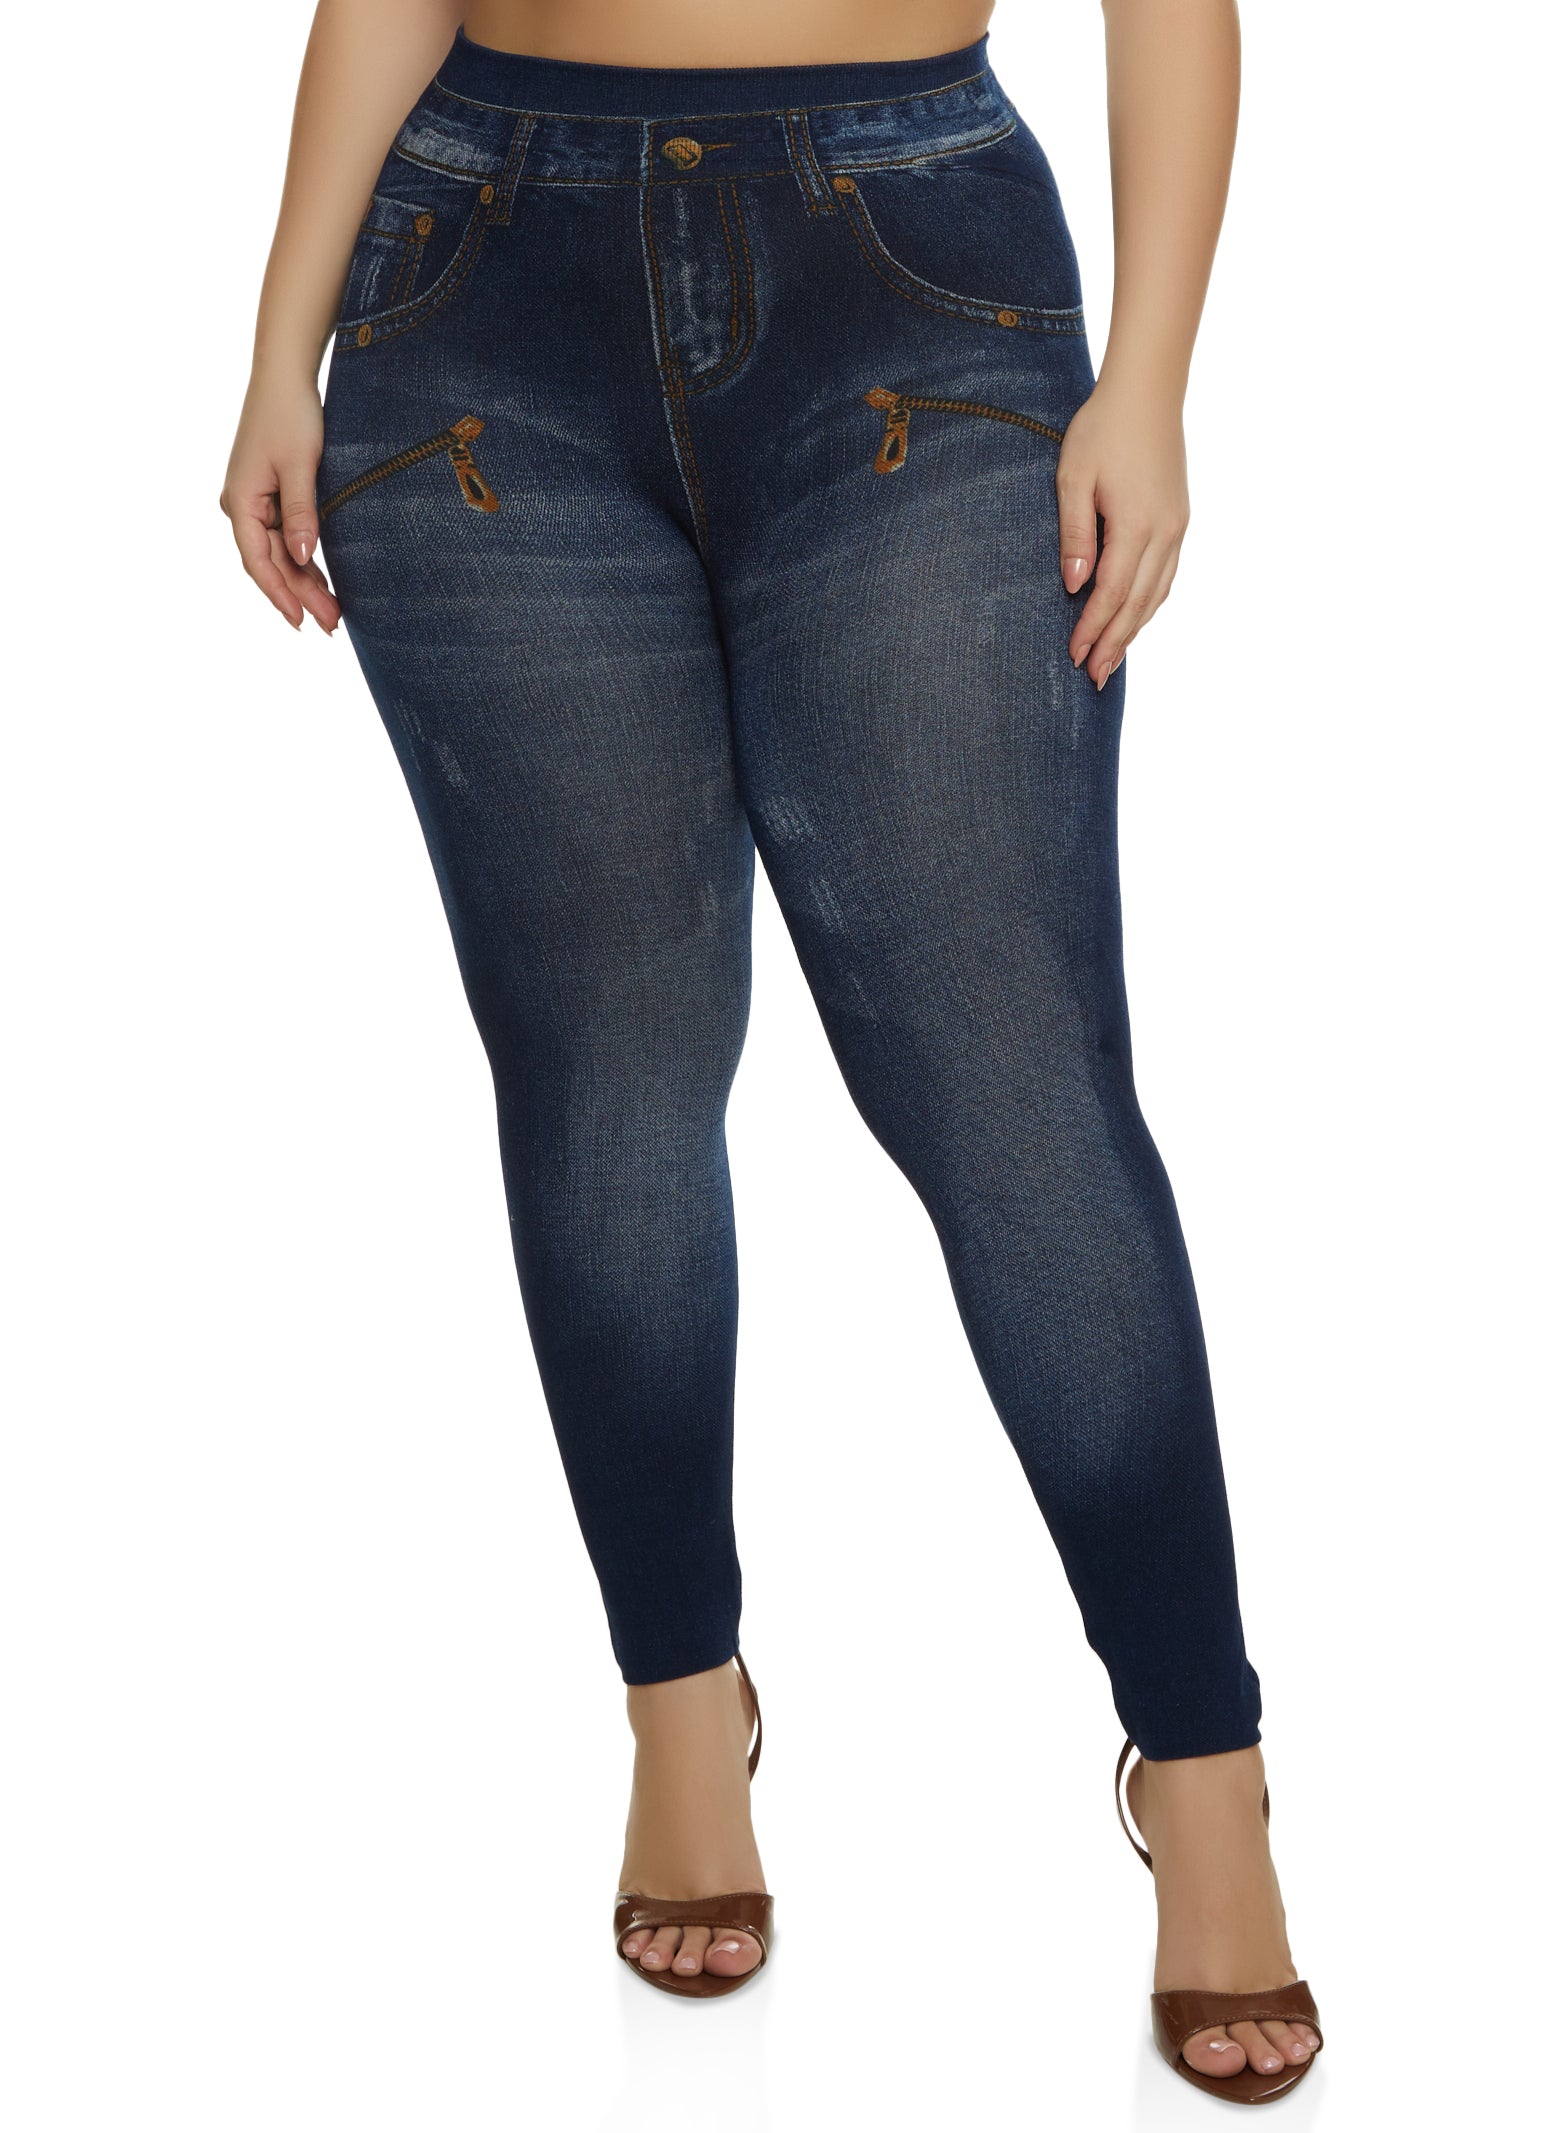 Shop Textured Mid Rise Jeggings with Elasticised Waistband Online